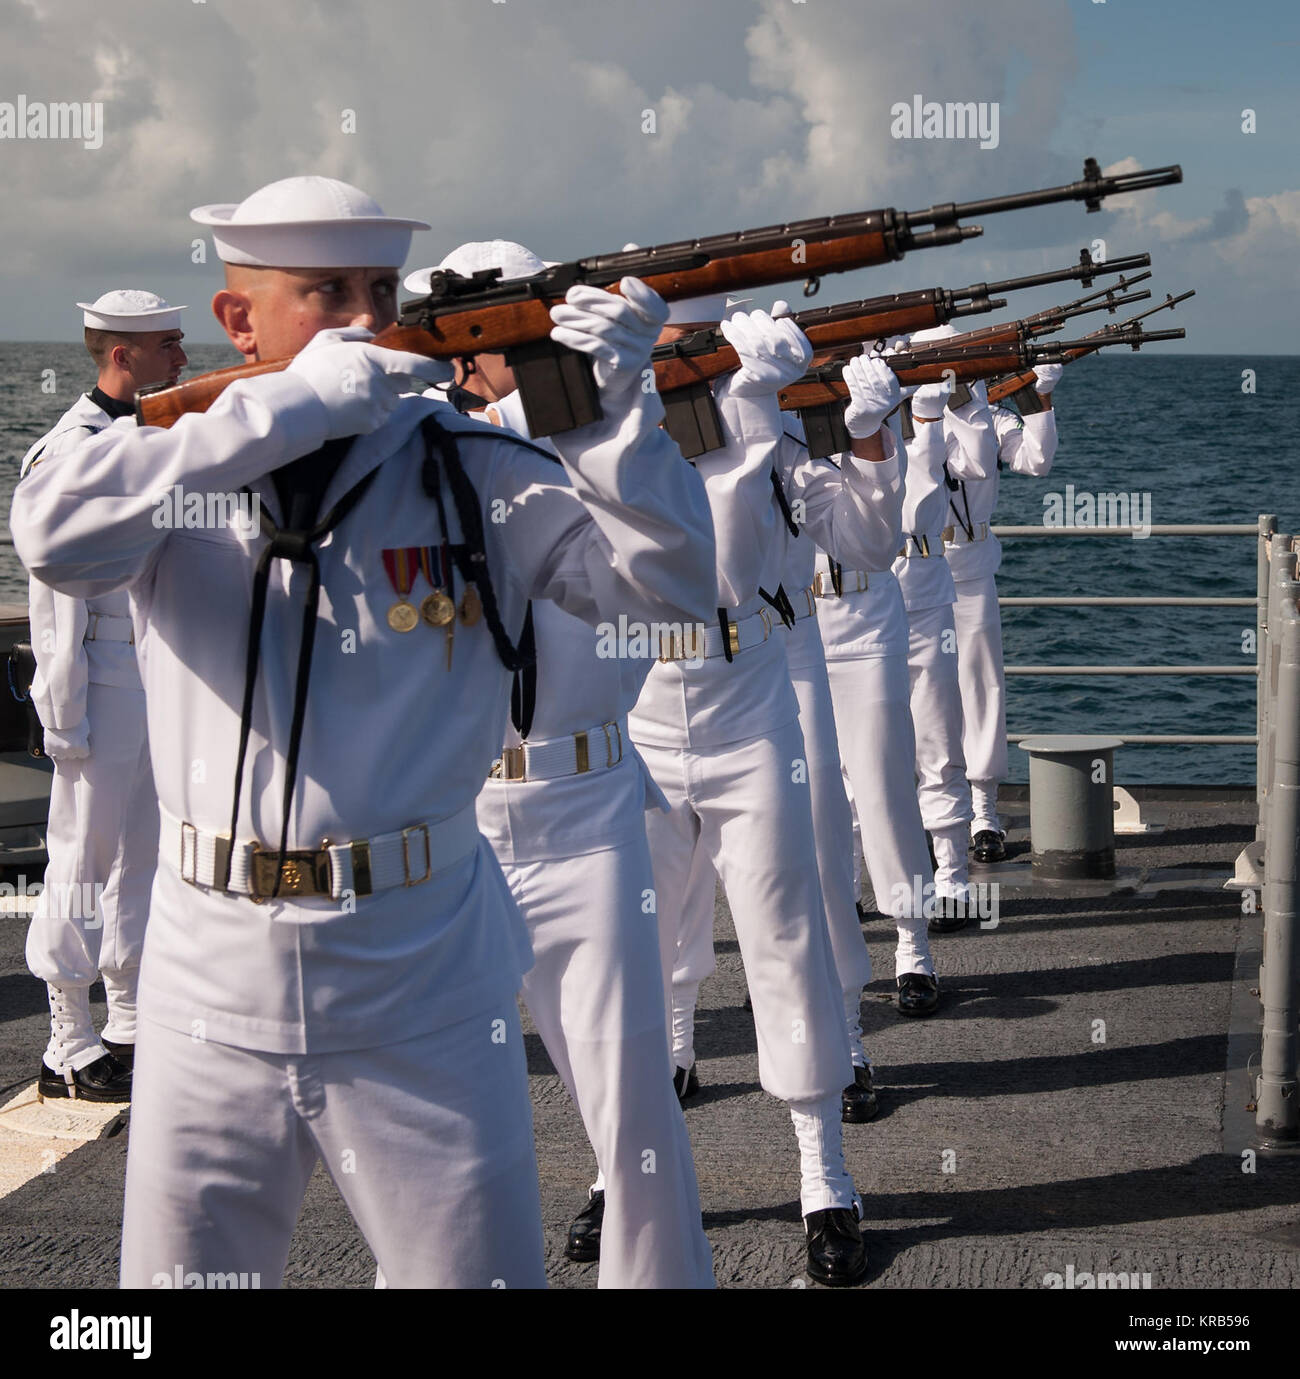 A US Navy firing squad fires three volleys in honor of Neil Armstrong during his burial at sea service aboard the USS Philippine Sea (CG 58), Friday, Sept. 14, 2012, in the Atlantic Ocean. Armstrong, the first man to walk on the moon during the 1969 Apollo 11 mission, died Saturday, Aug. 25. He was 82. Photo Credit: (NASA/Bill Ingalls) Neil Armstrong burial at sea (201209140016HQ) Stock Photo